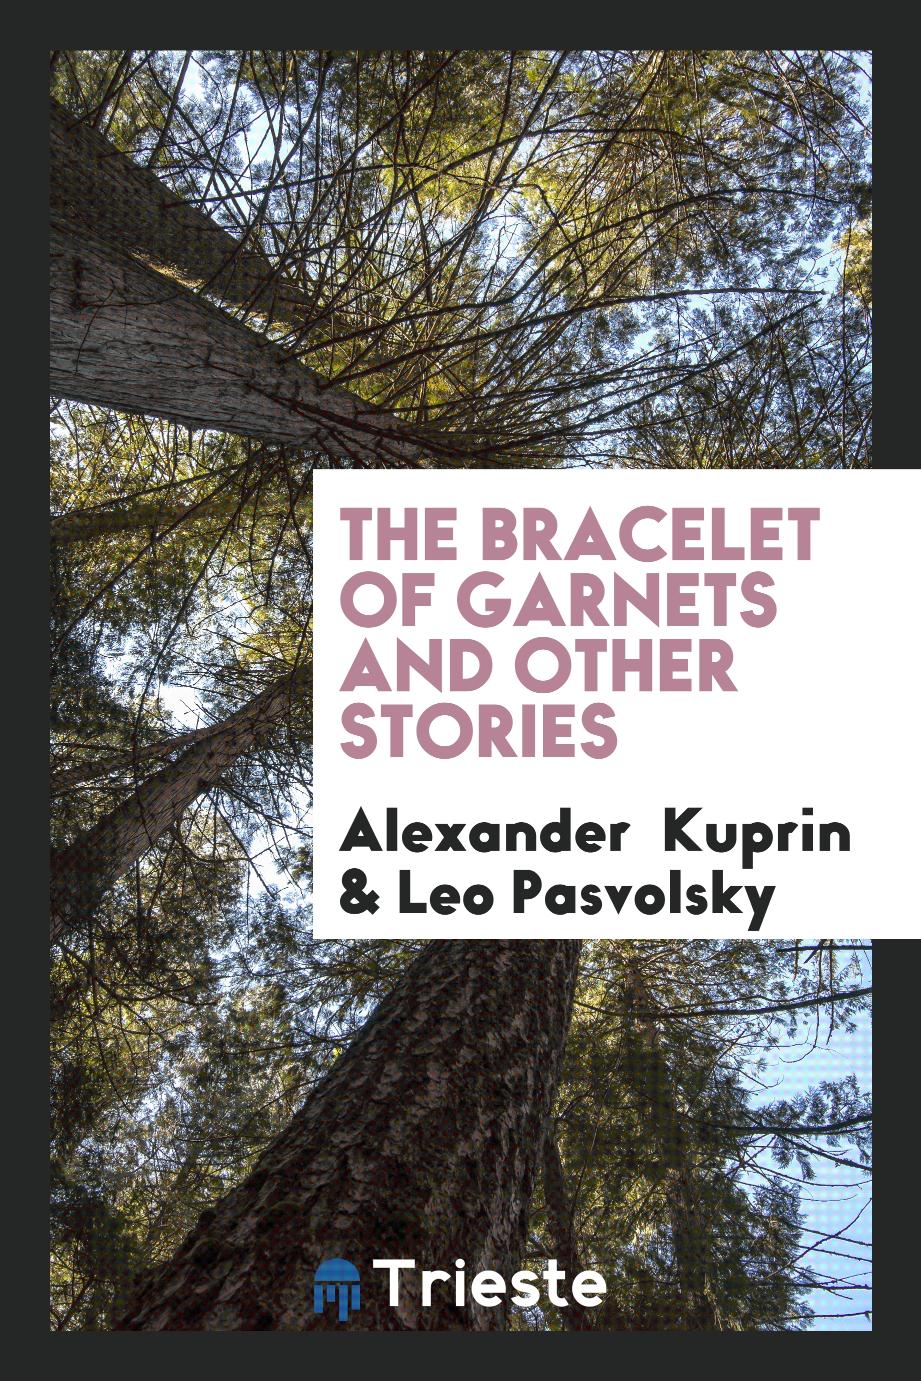 The bracelet of garnets and other stories